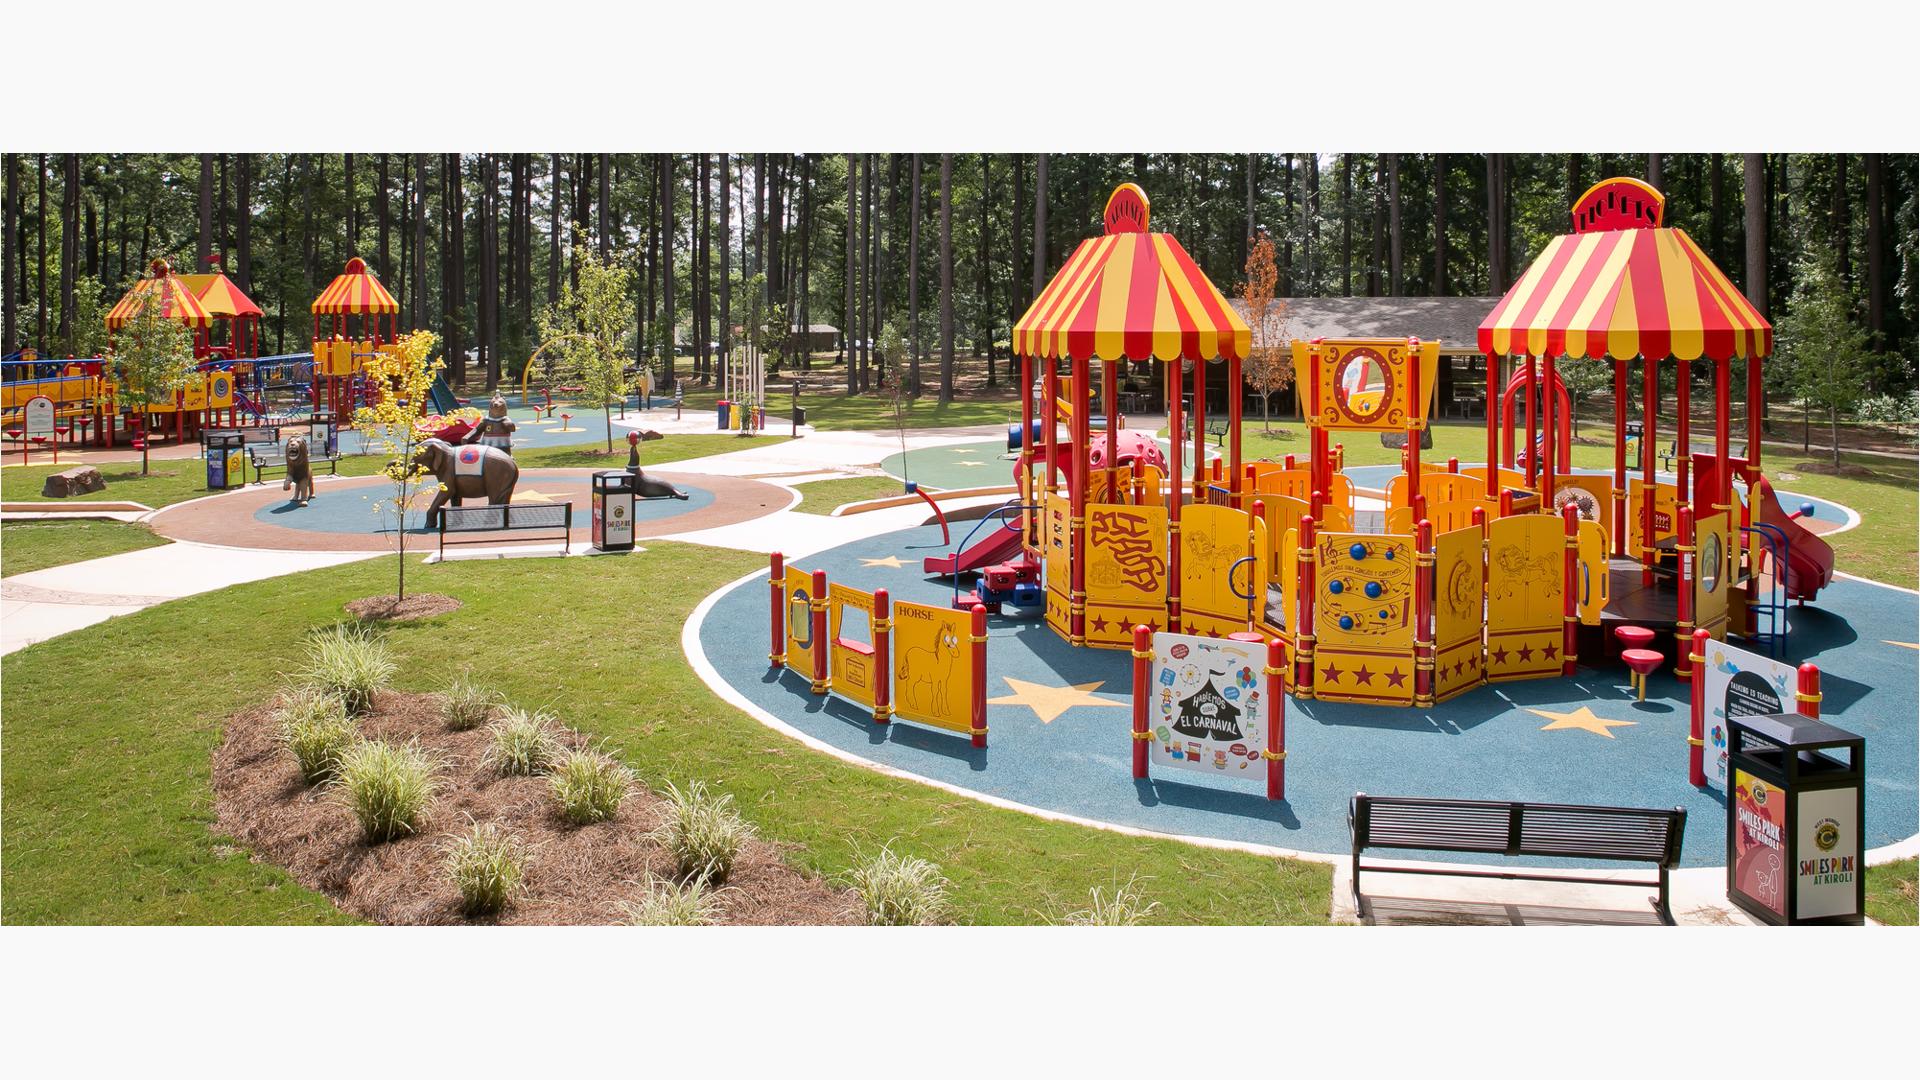 In the foreground yellow and red colored circus themed play structure has roof panels designed like circus tents. A second circus themed play structure sits in the background along with a surrounding wall of tall trees.